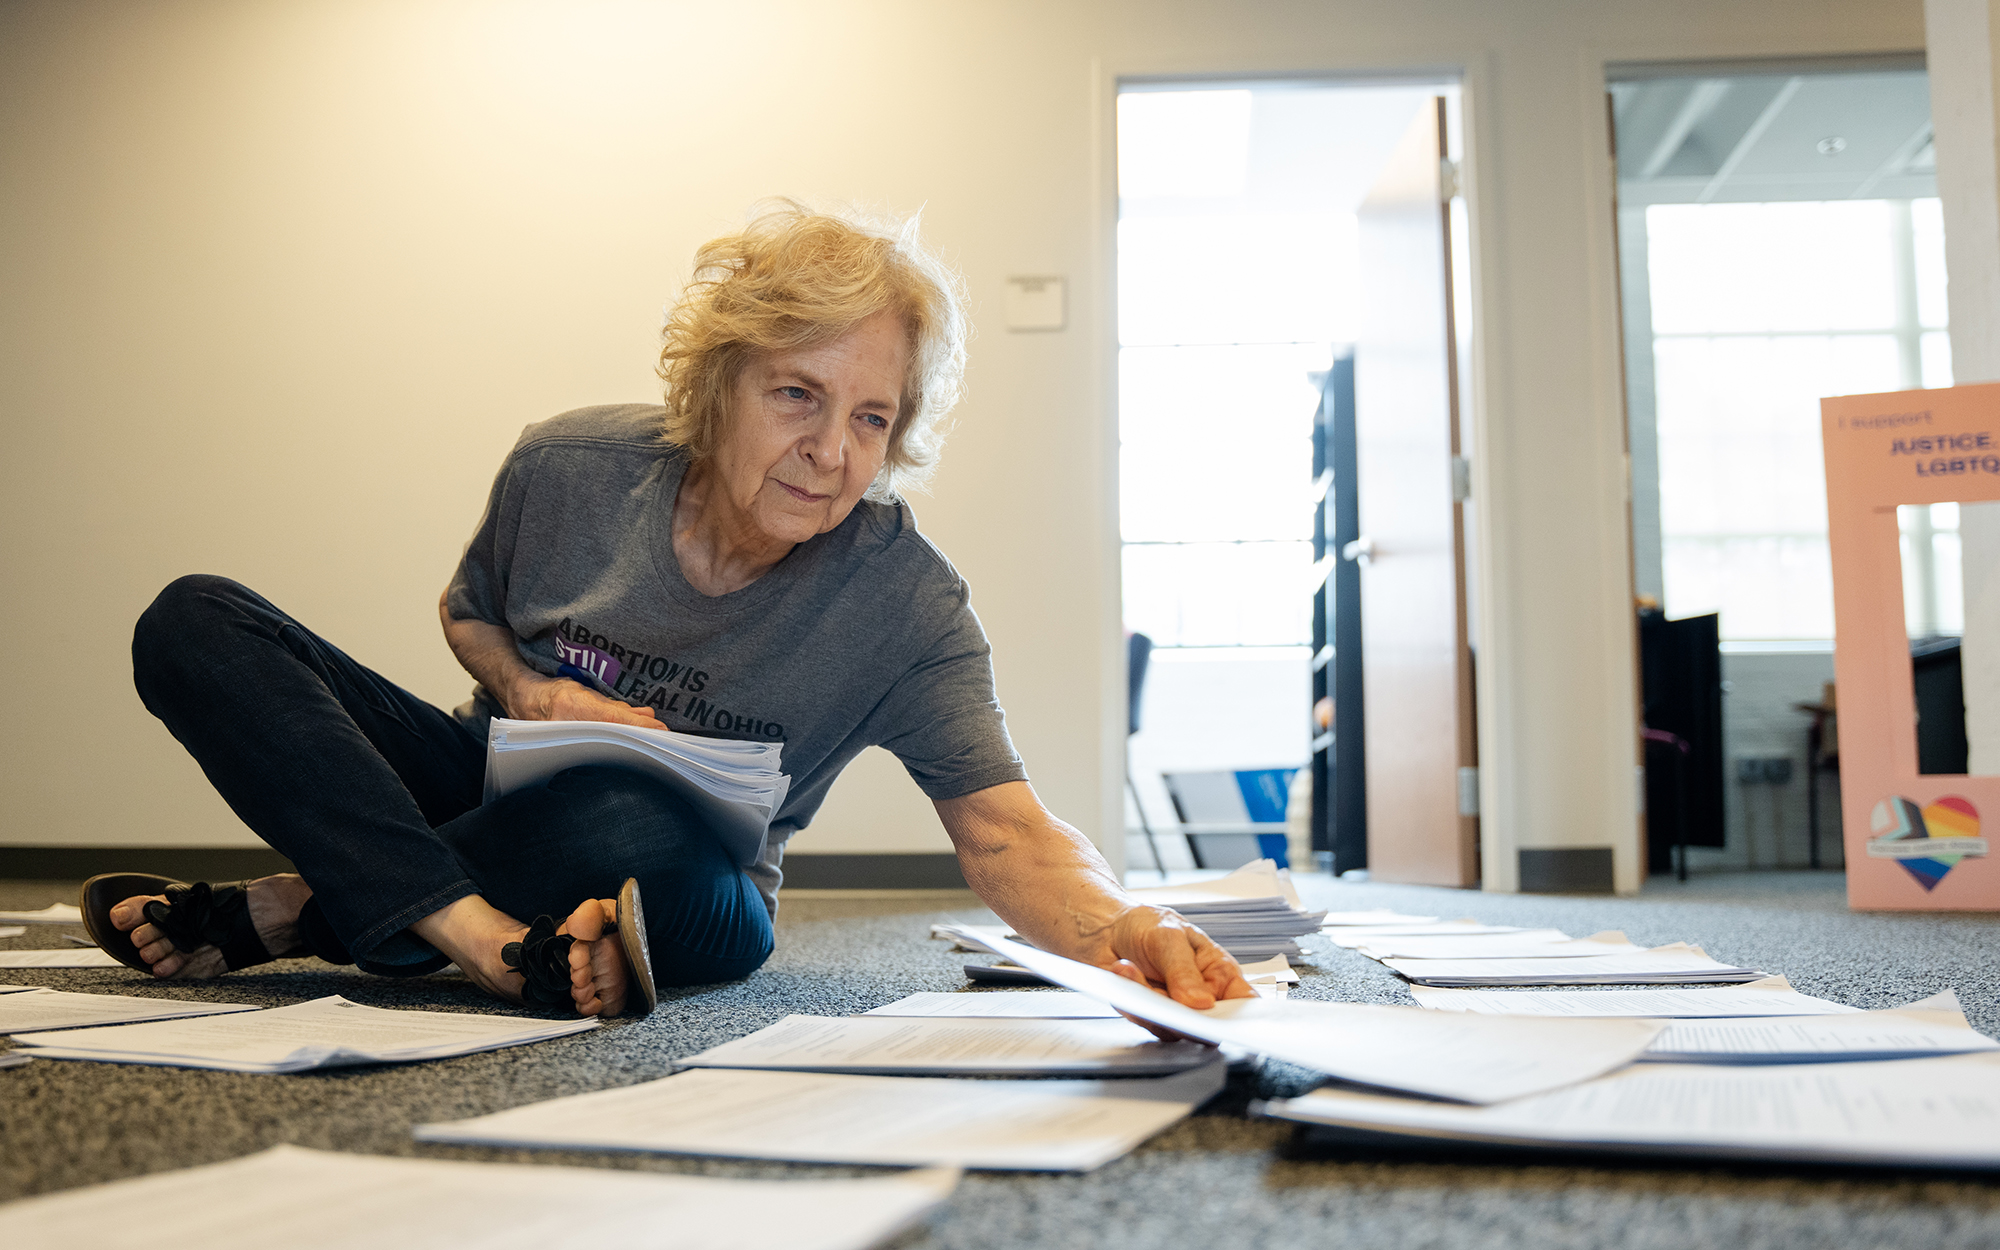 Bobbie Ackerman organizes petitions at the American Civil Liberties Union of Ohio office in Columbus on June 26, 2023. The group helped lead the push to get a constitutional amendment to protect abortion rights on the November ballot. (Photo by Mingson Lau/News21)